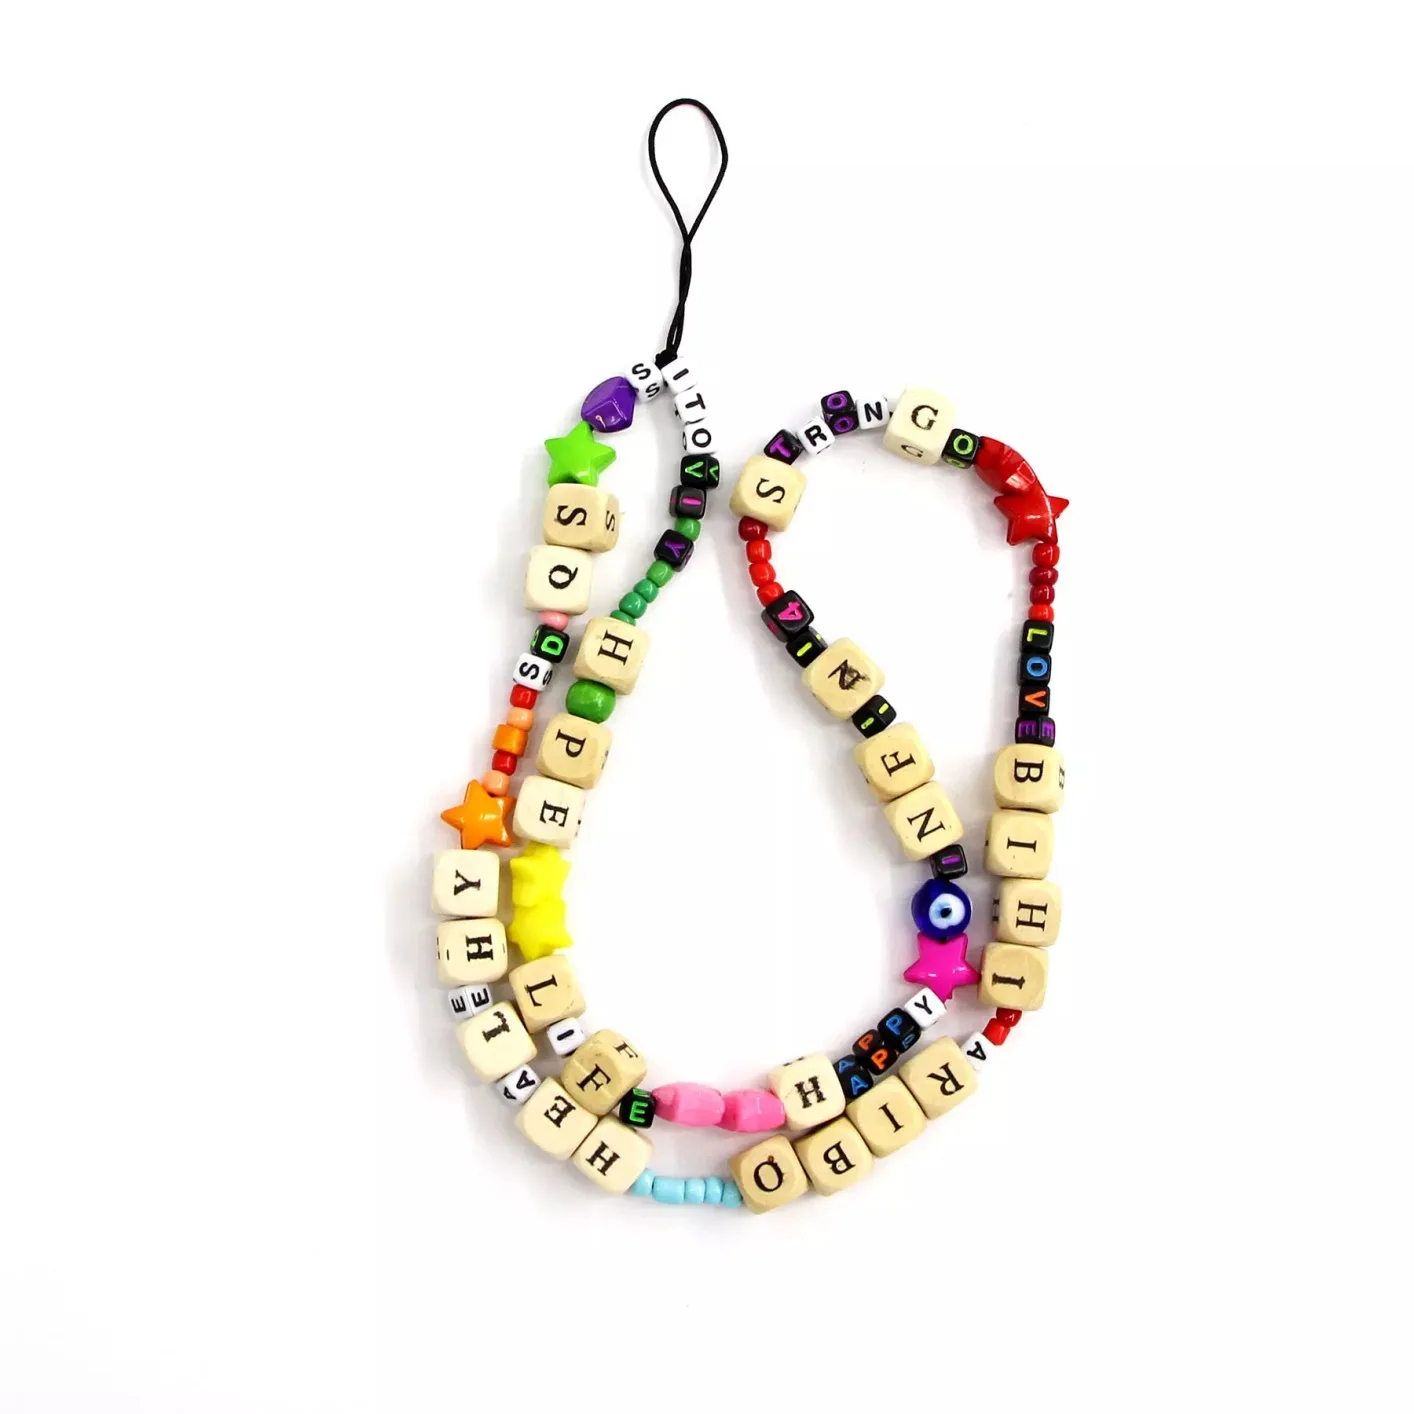 2021 Chic Fashion Mobile Phone Chain Handmade Simple Letter Beaded Summer Mobile Phone Chain Key Chain